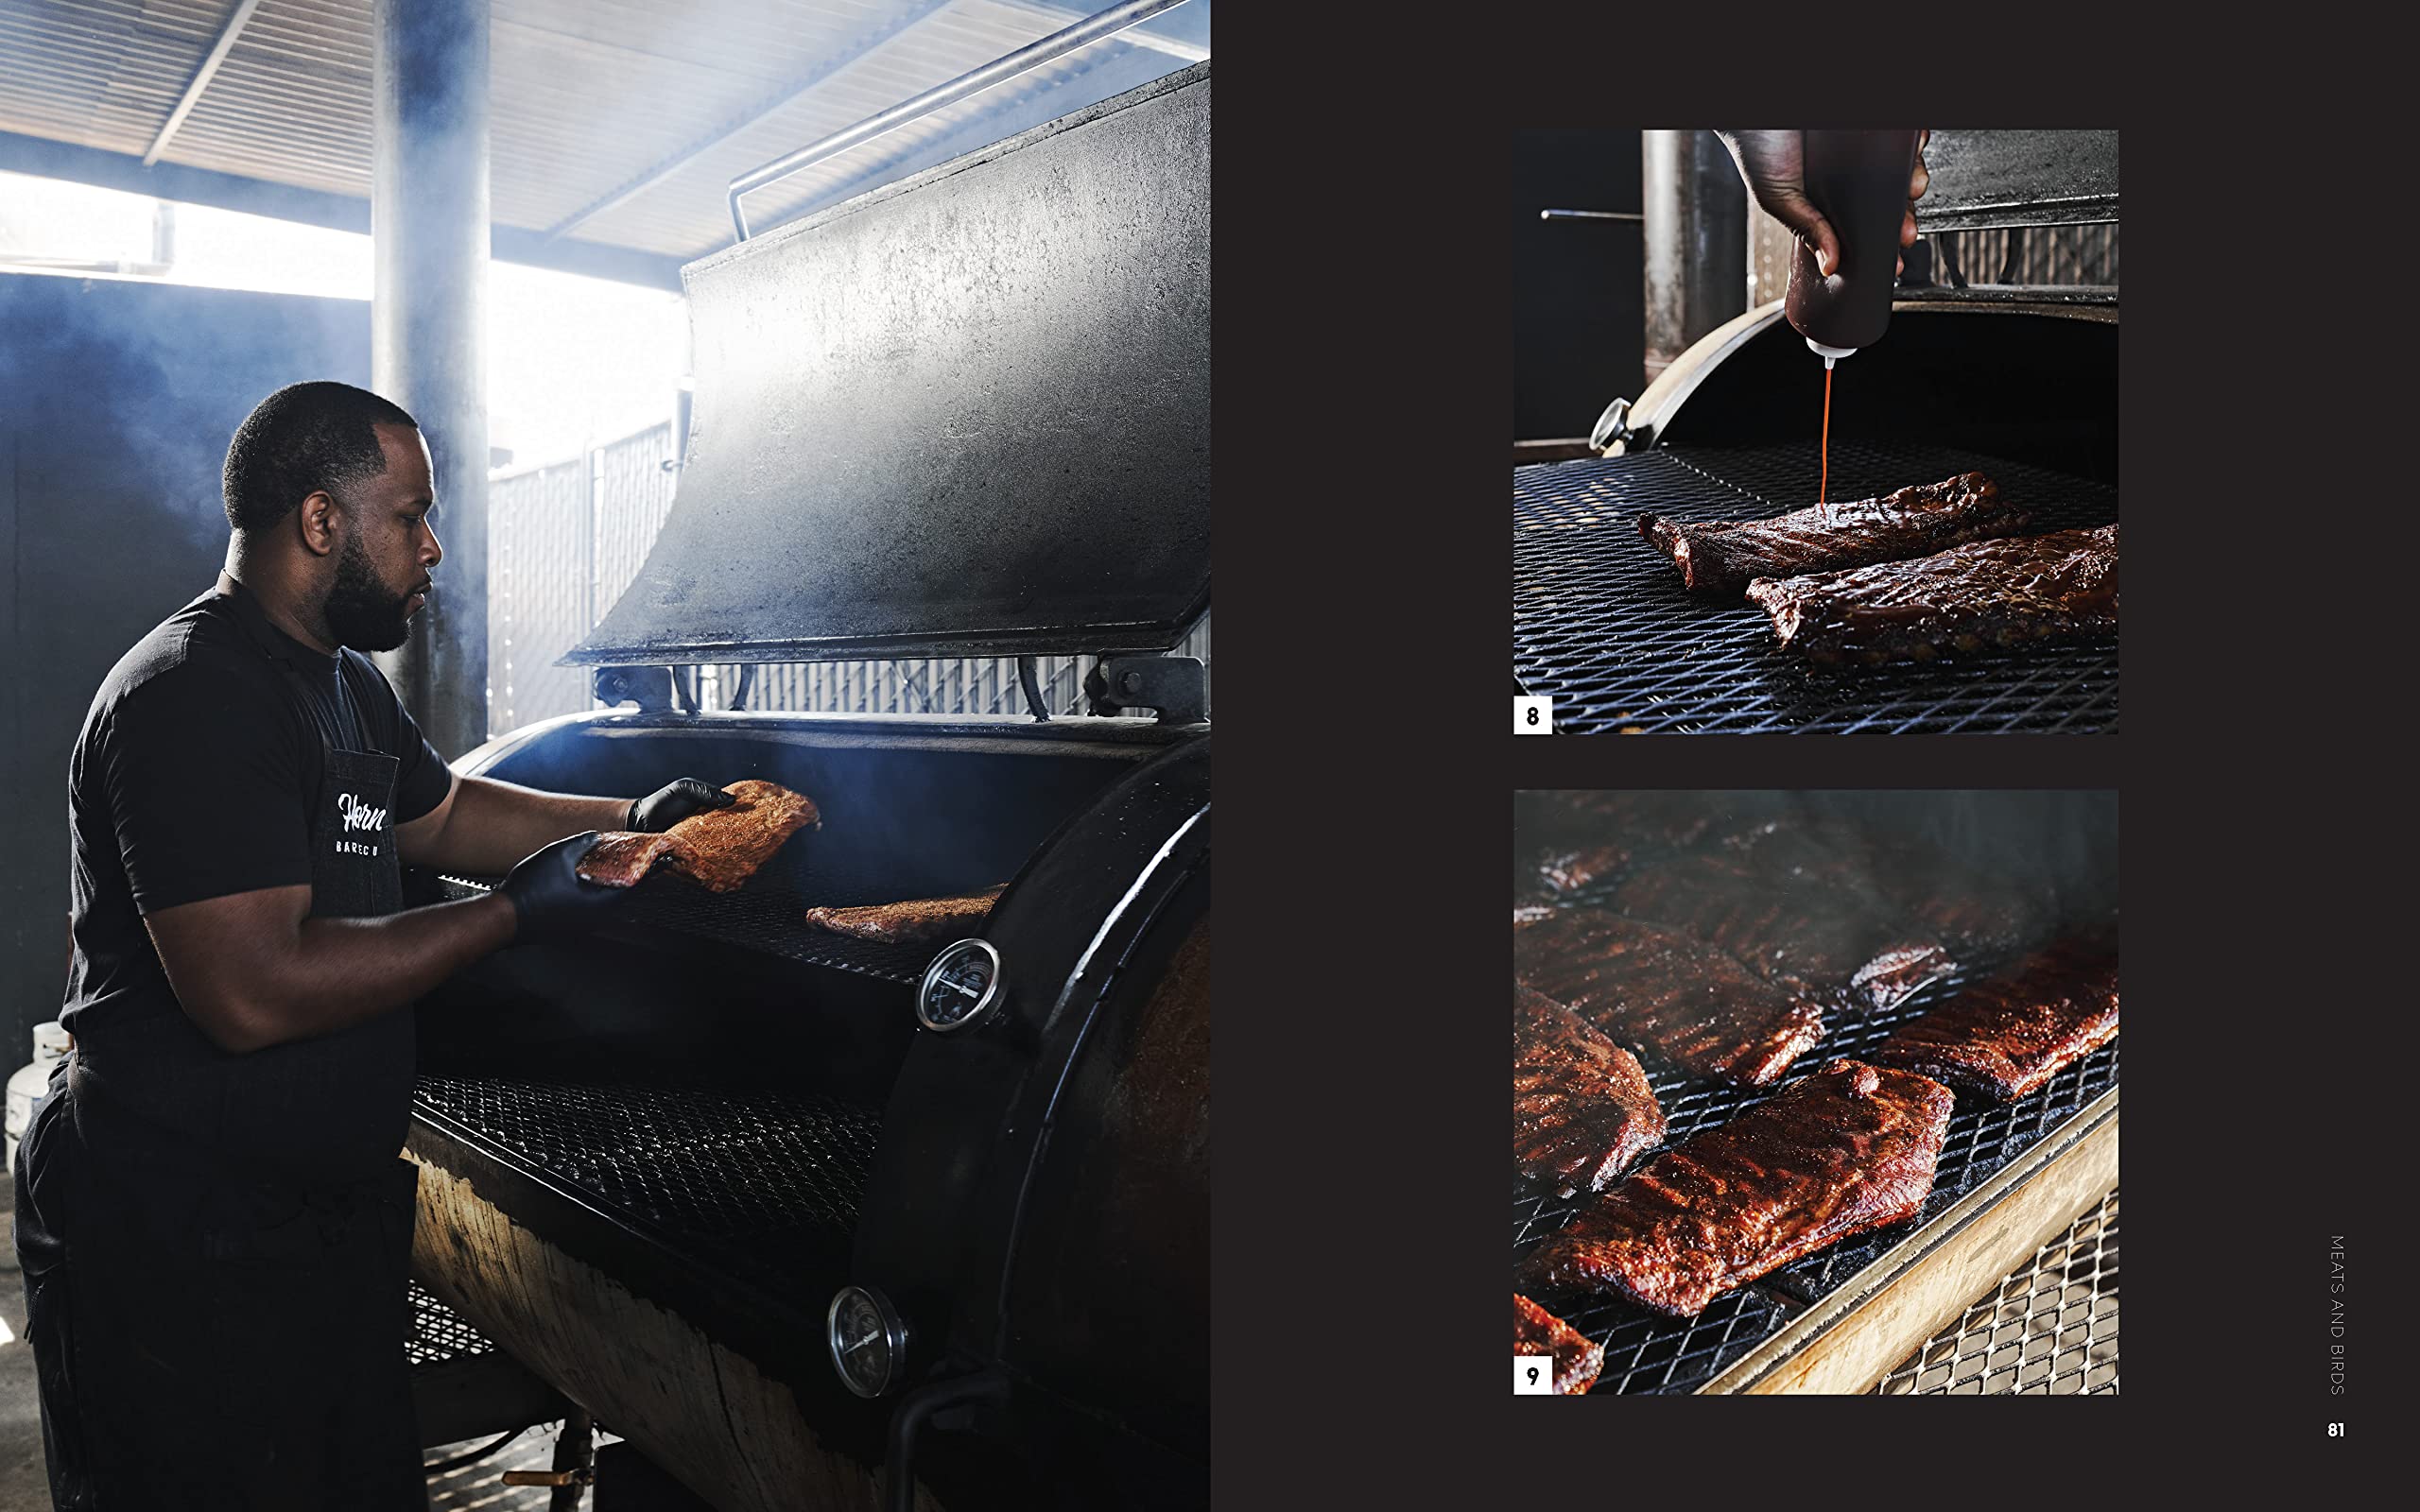 Horn Barbecue: Recipes and Techniques from a Master of the Art of BBQ (Matt Horn)